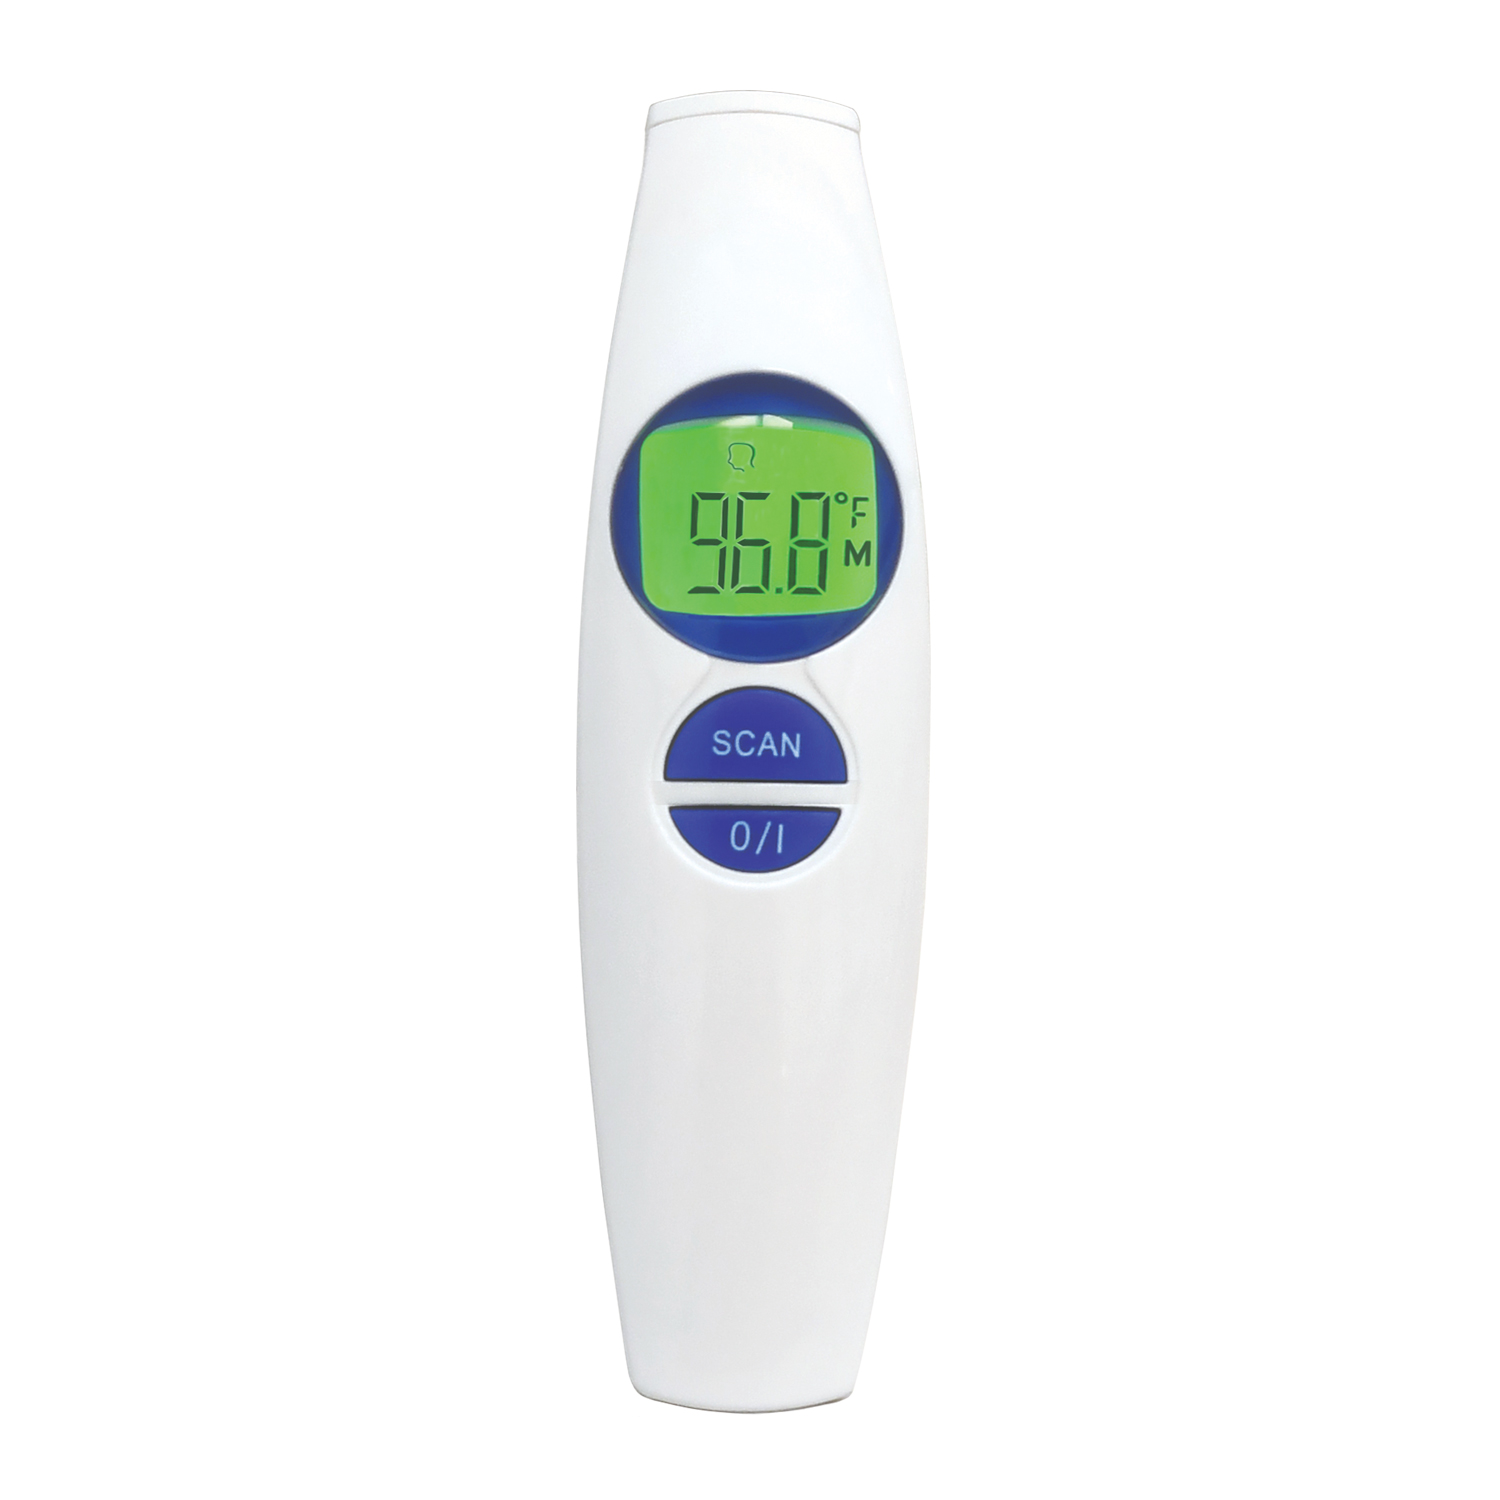 Infrared Forehead and Ear Thermometer: non Contact Thermometers